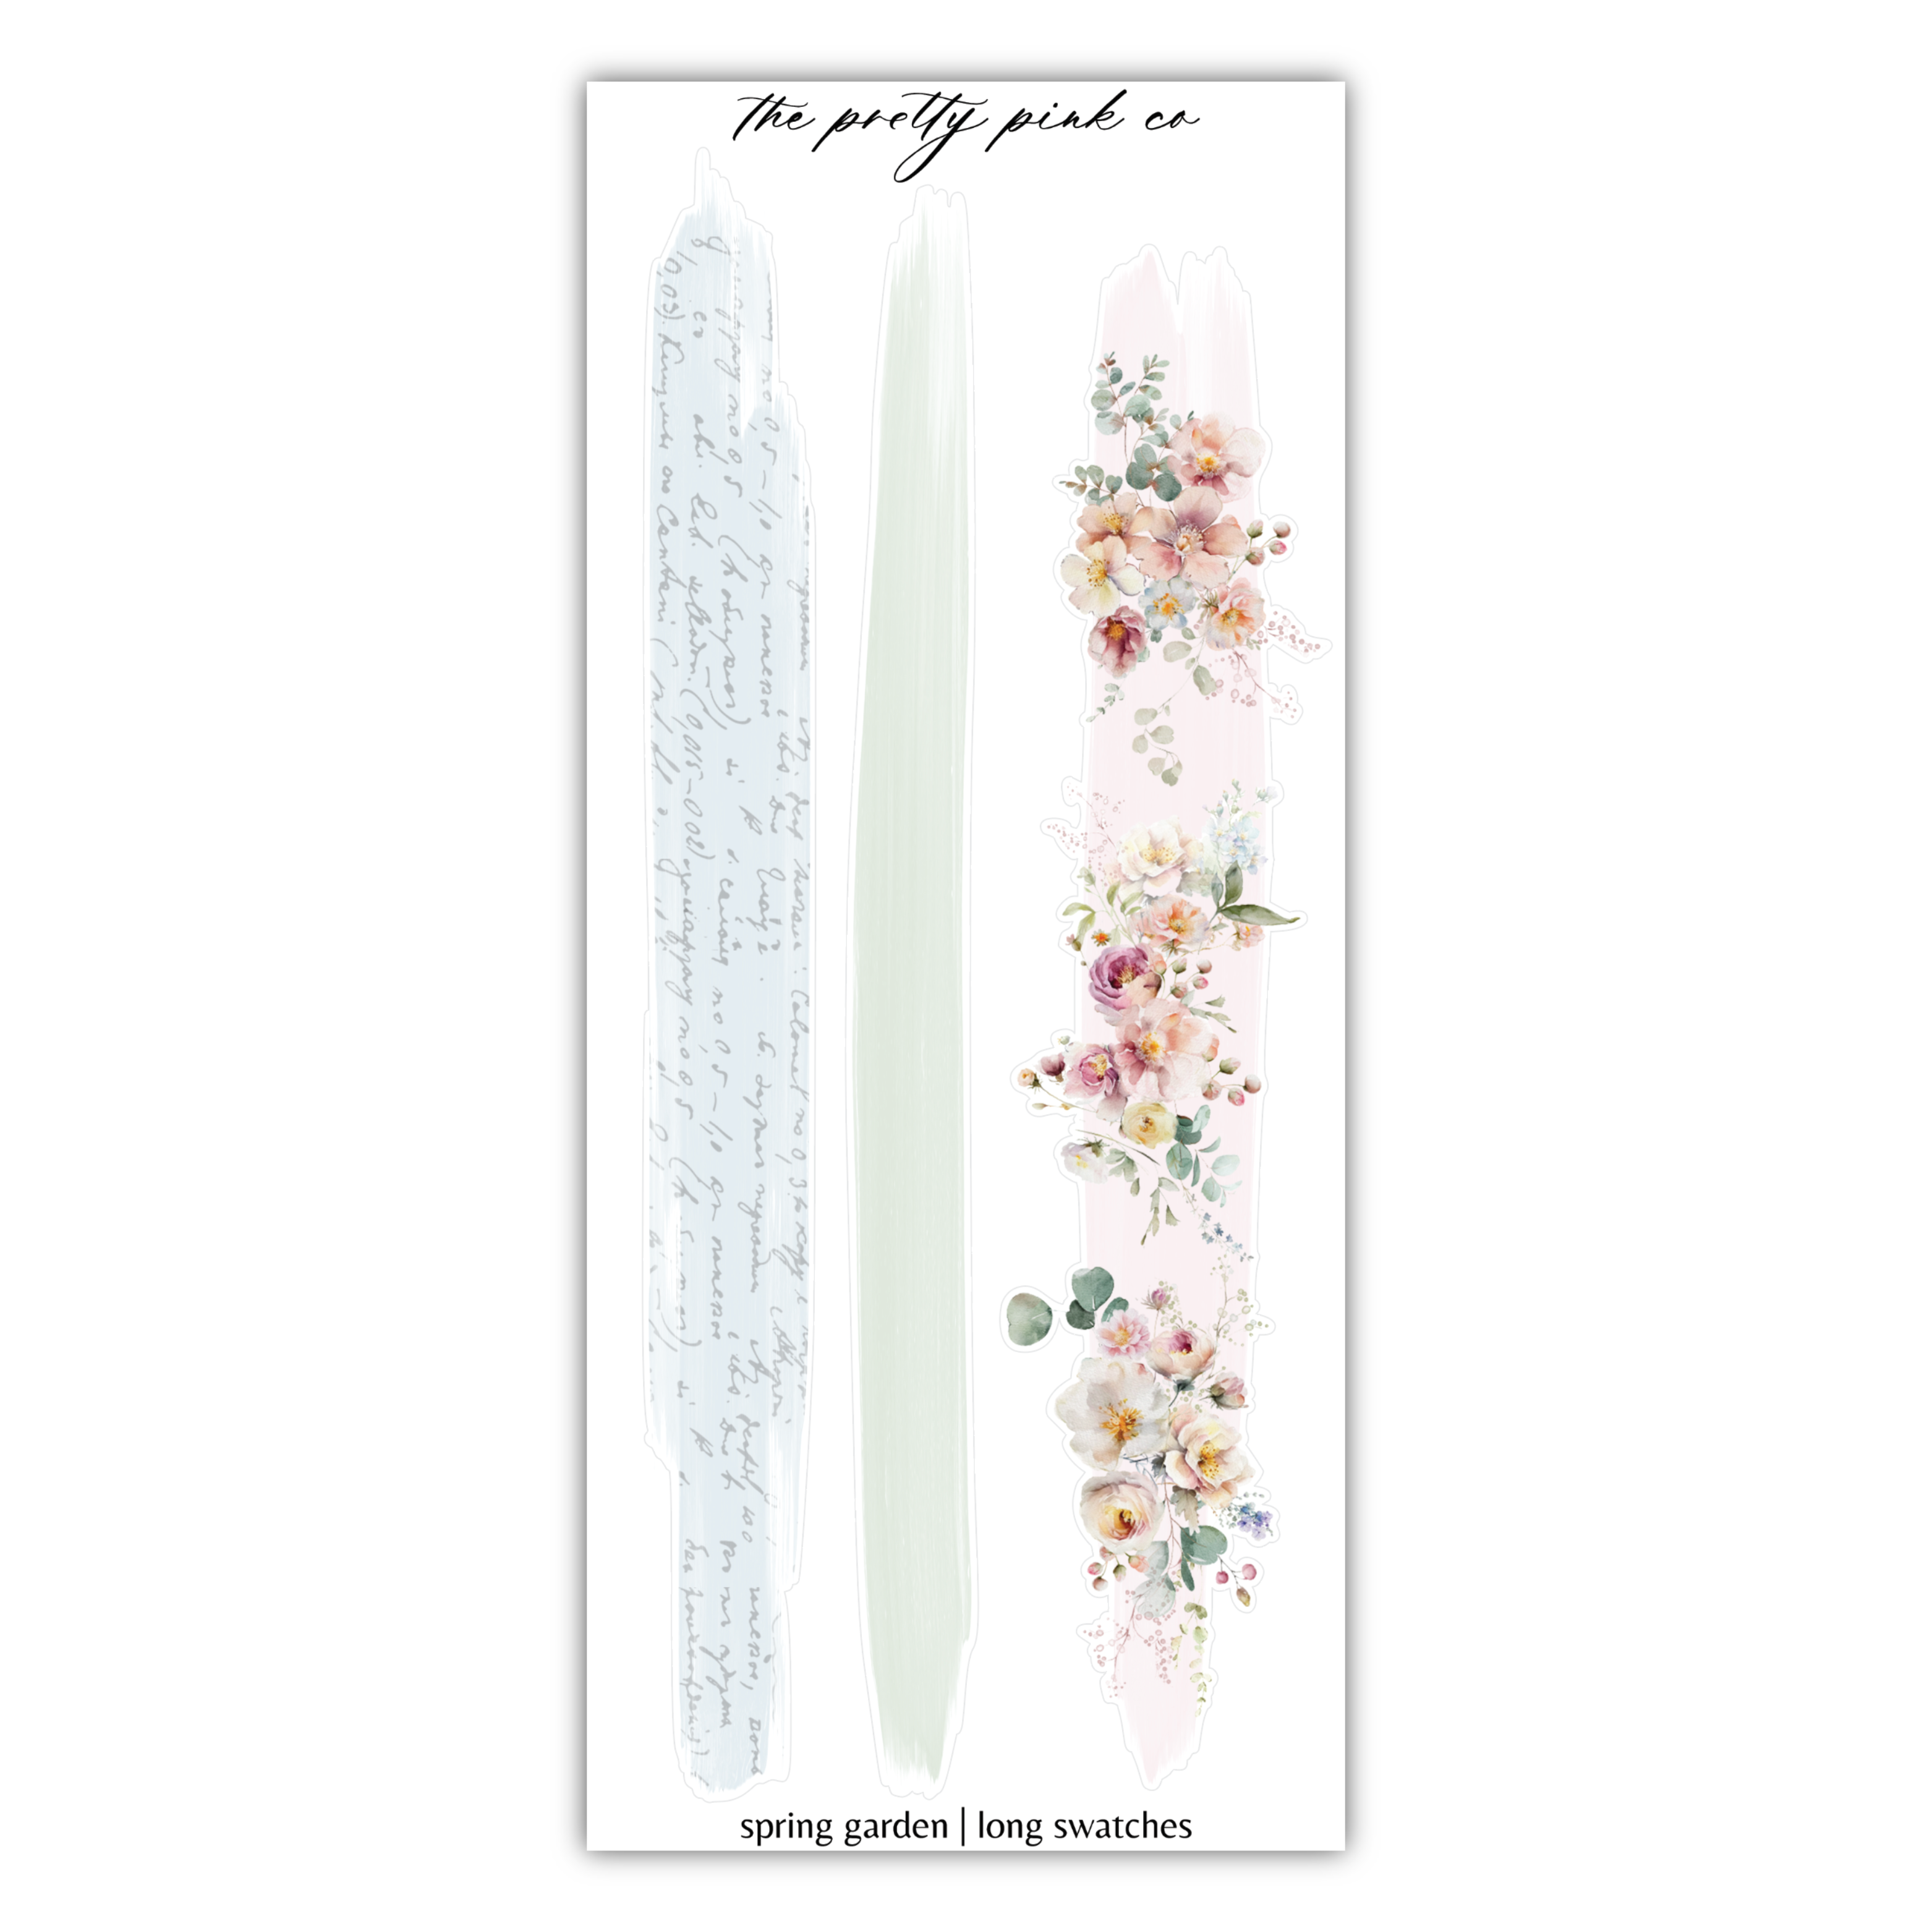 a sticker with flowers and writing on it